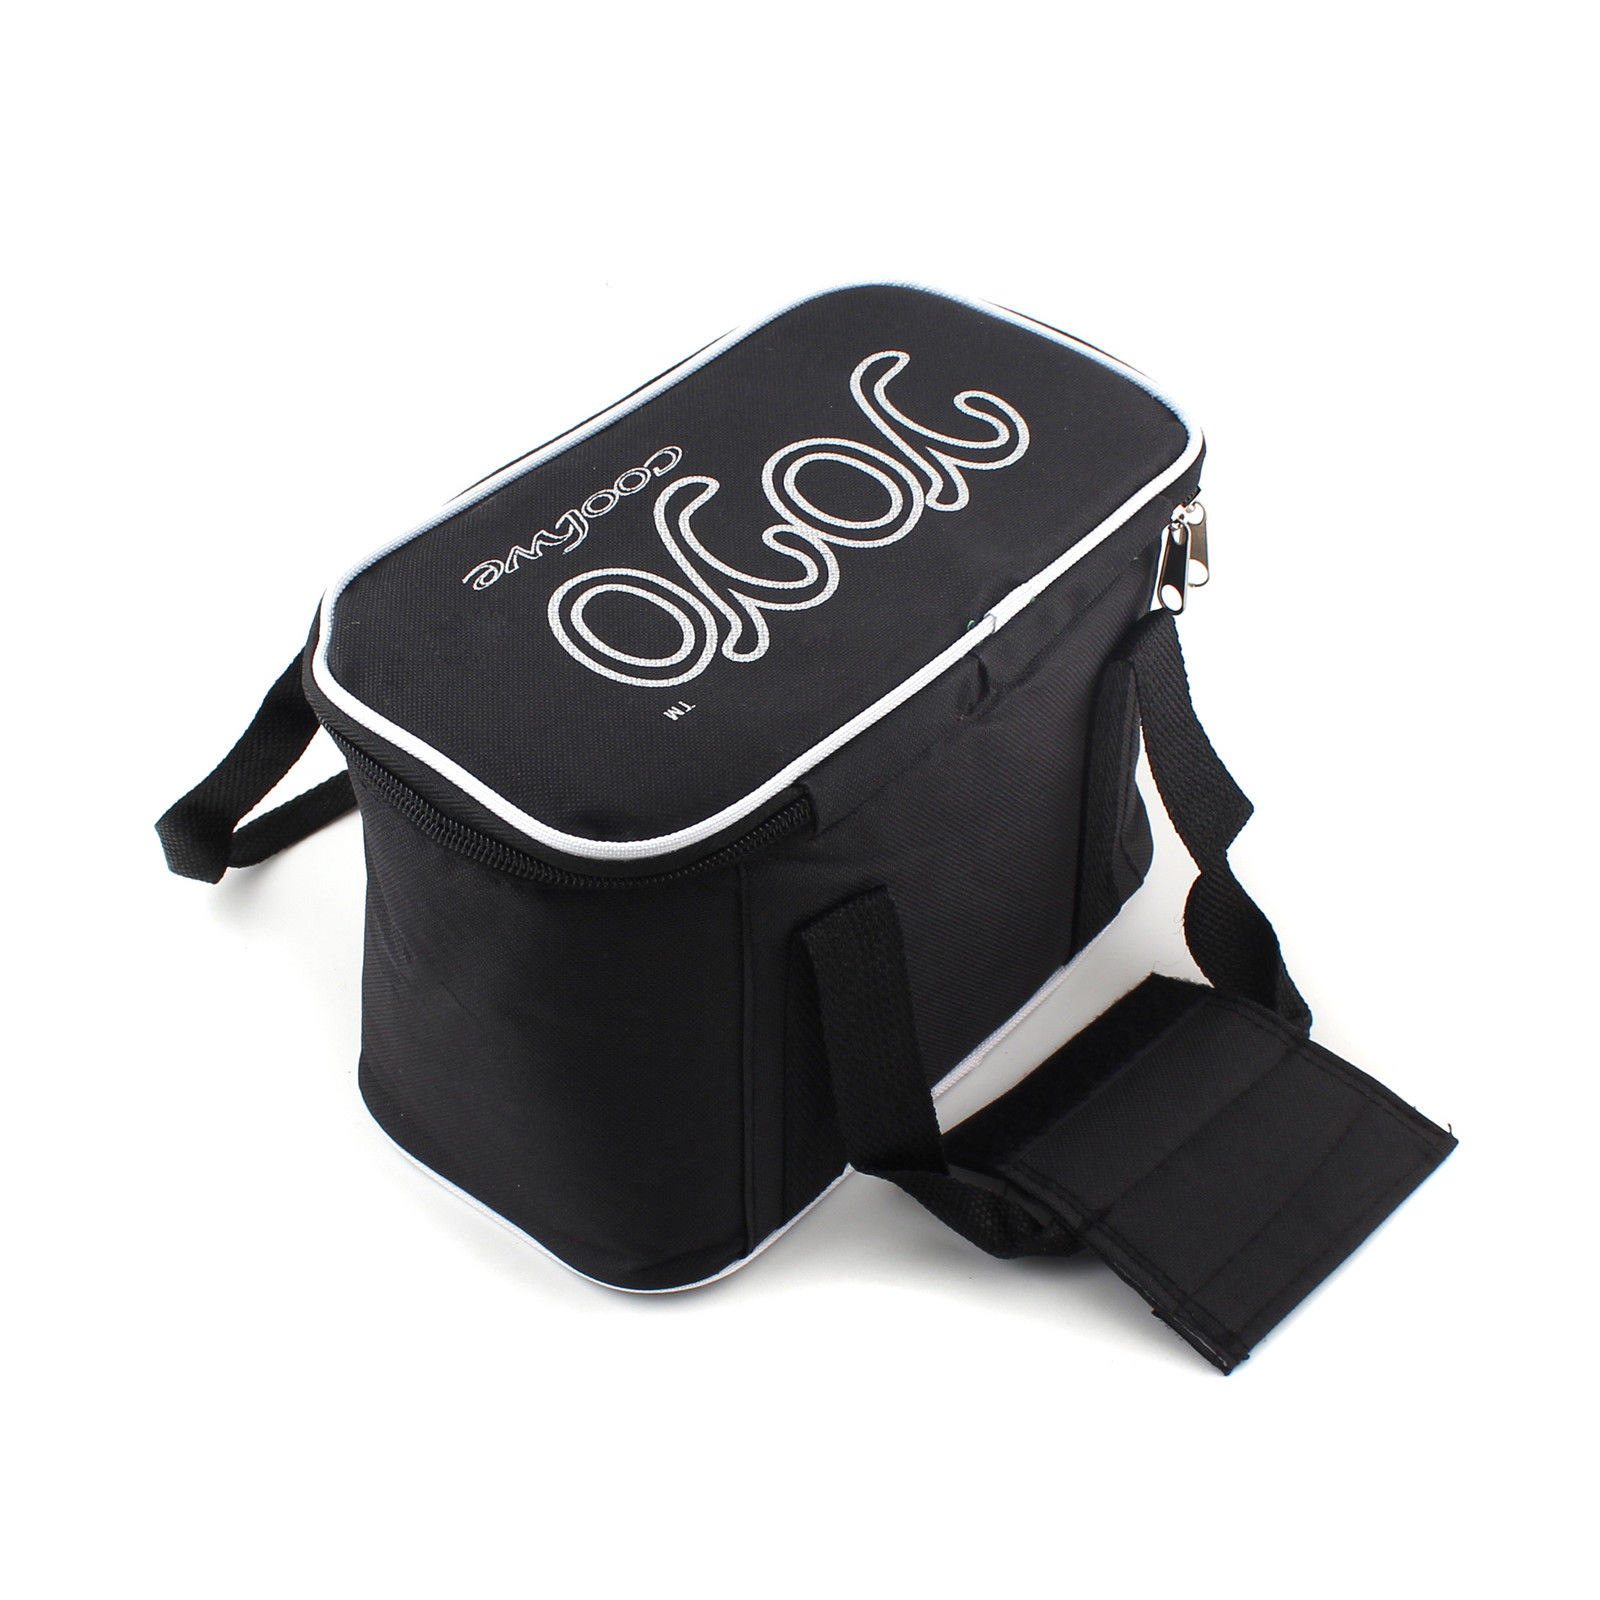 Black Portable waterproof Lunch Bag with Insulated Cooler